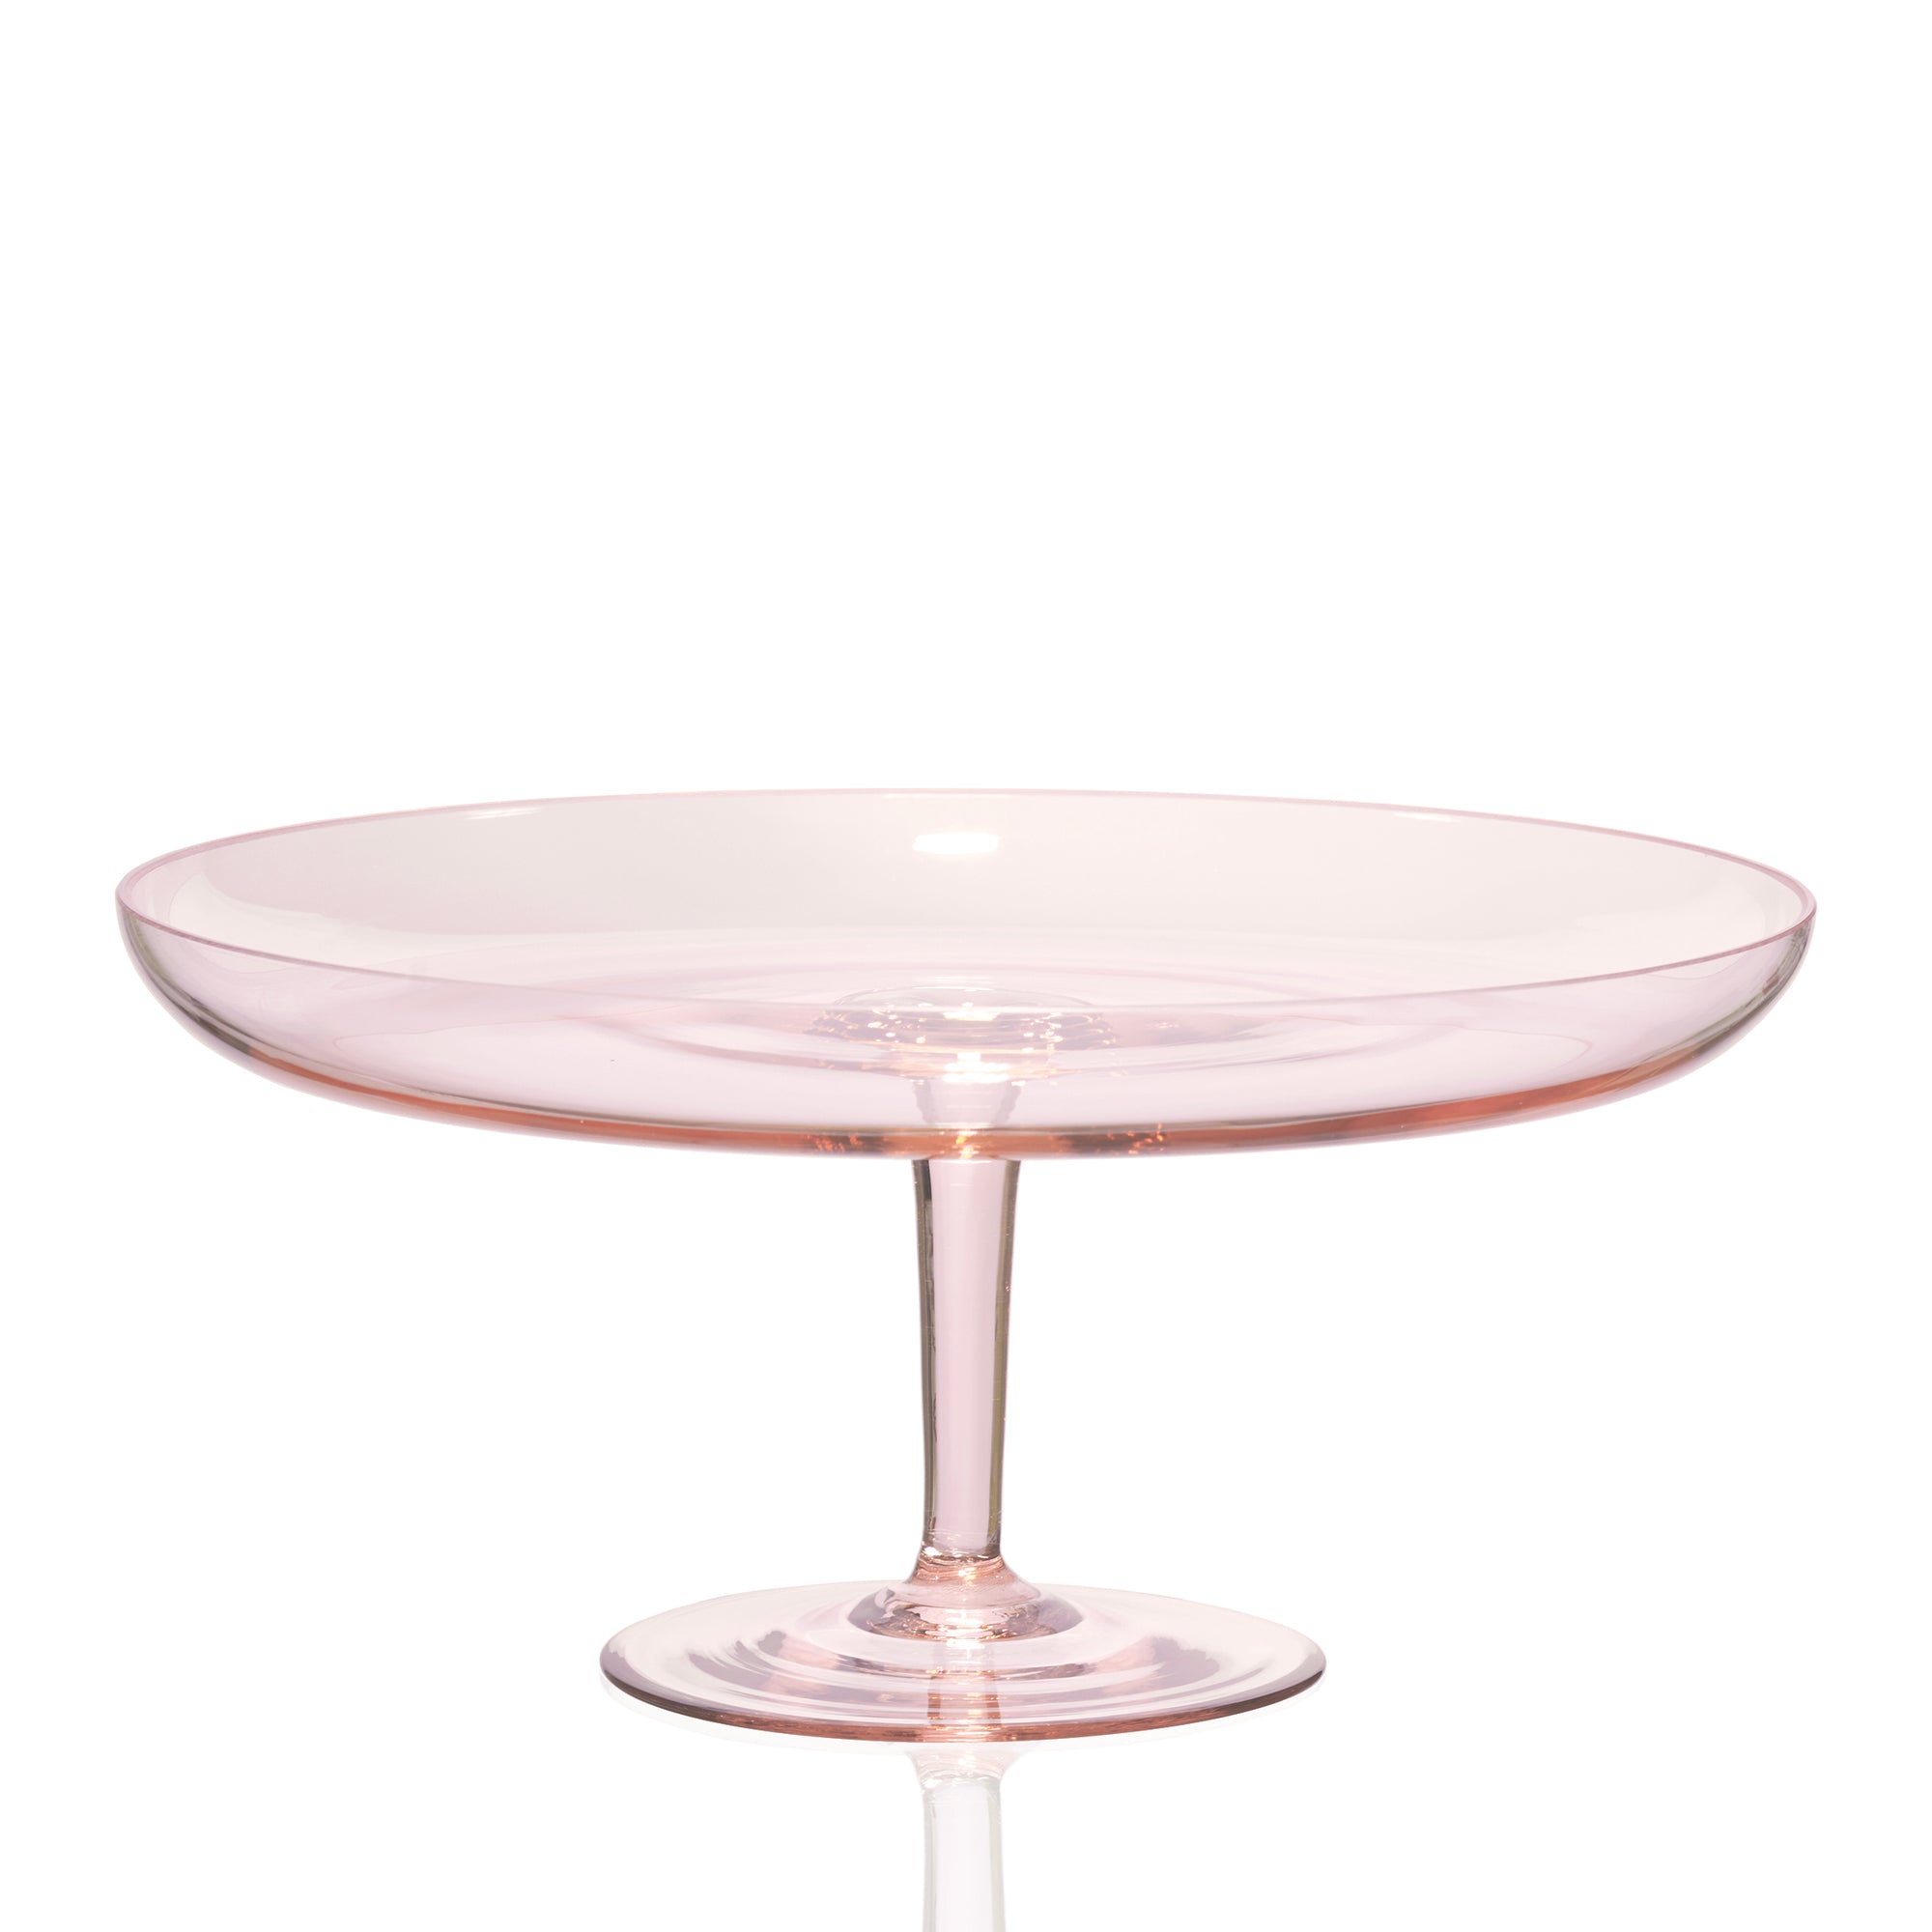 Celia rose pink crystal cake stand from Caskata.